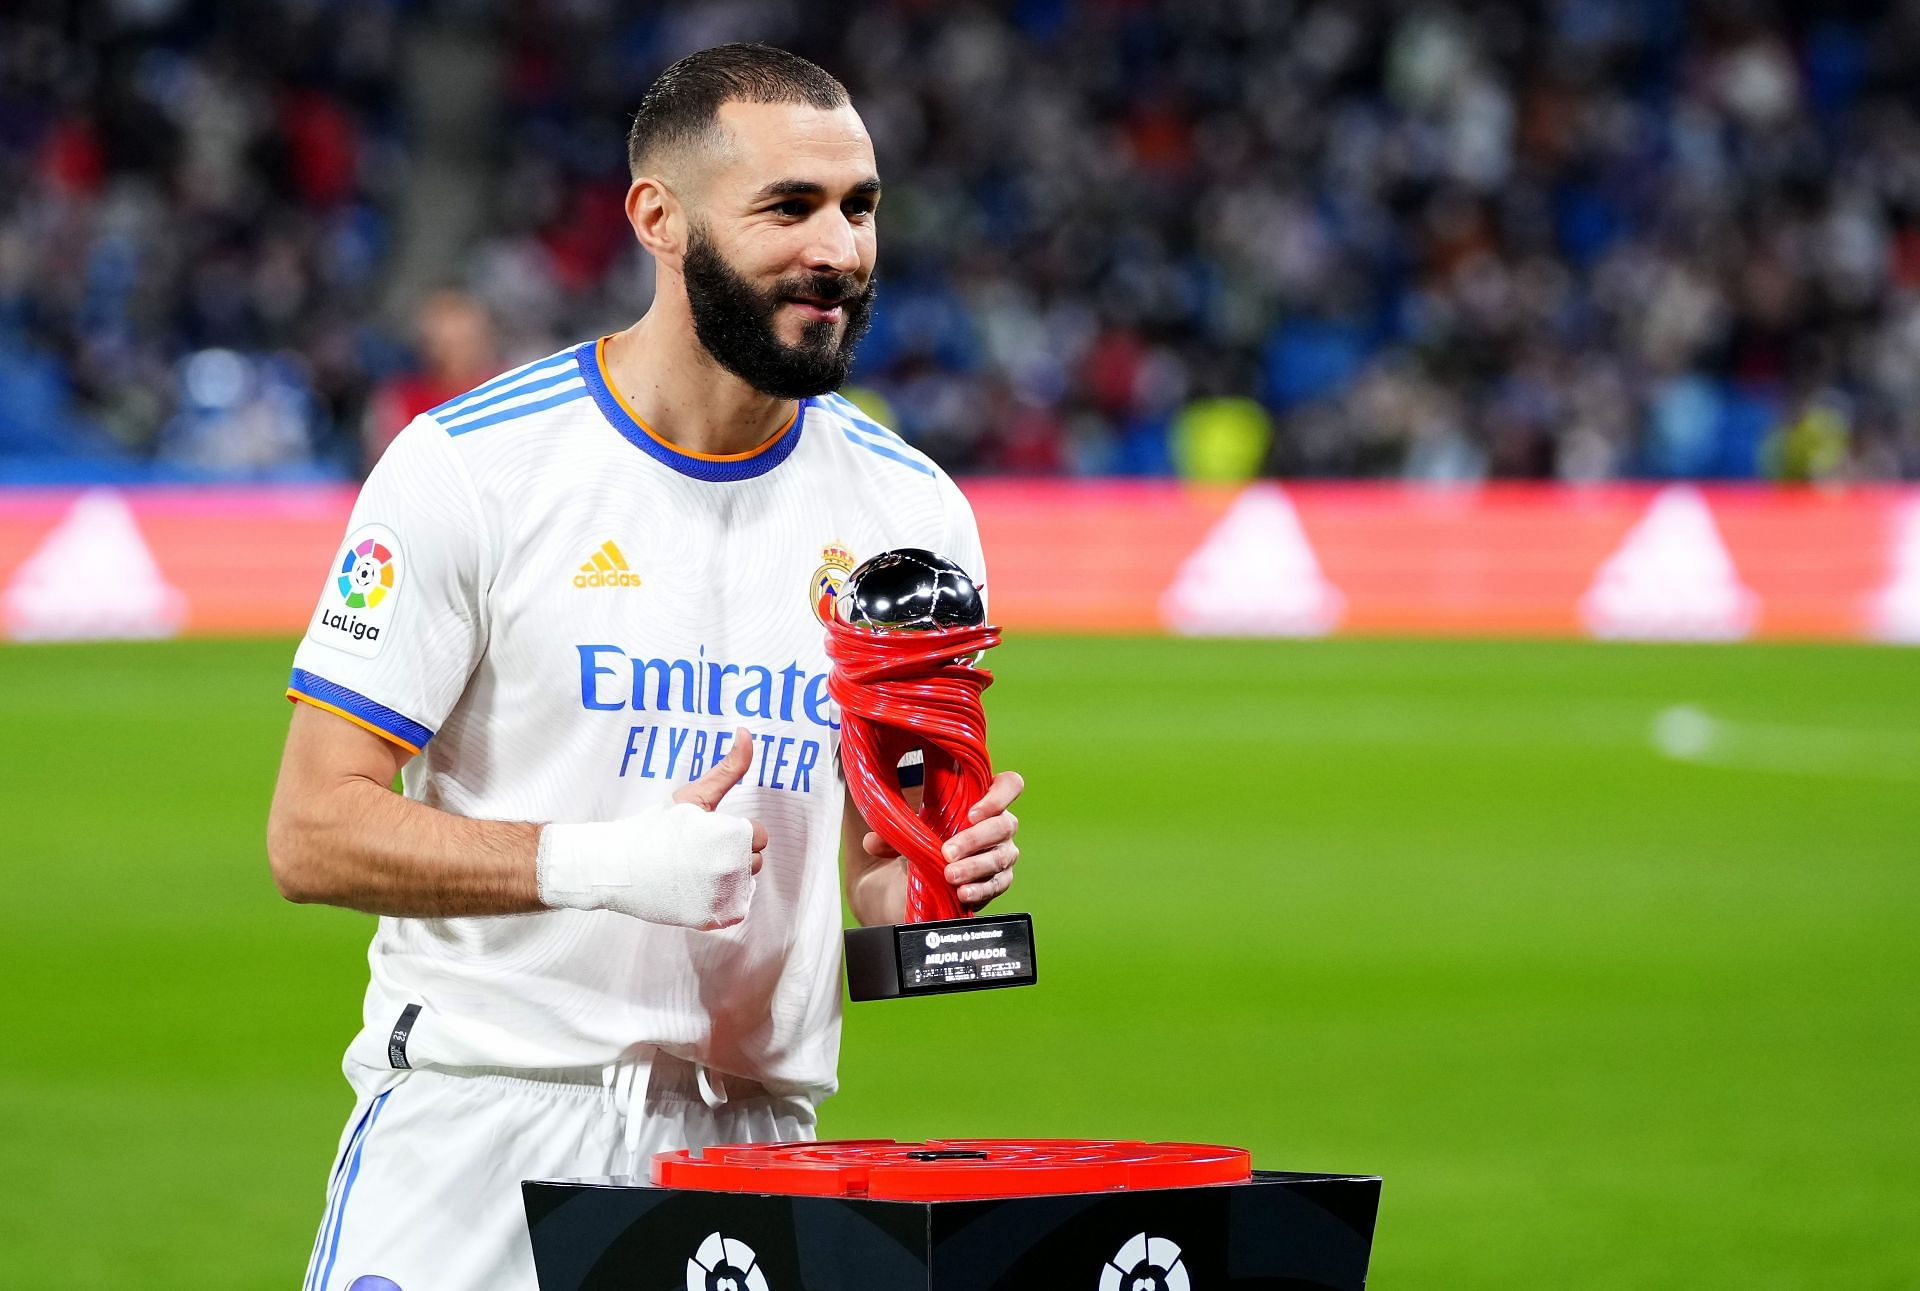 Karim Benzema of Real Madrid is presented with La Liga Player of the Month award